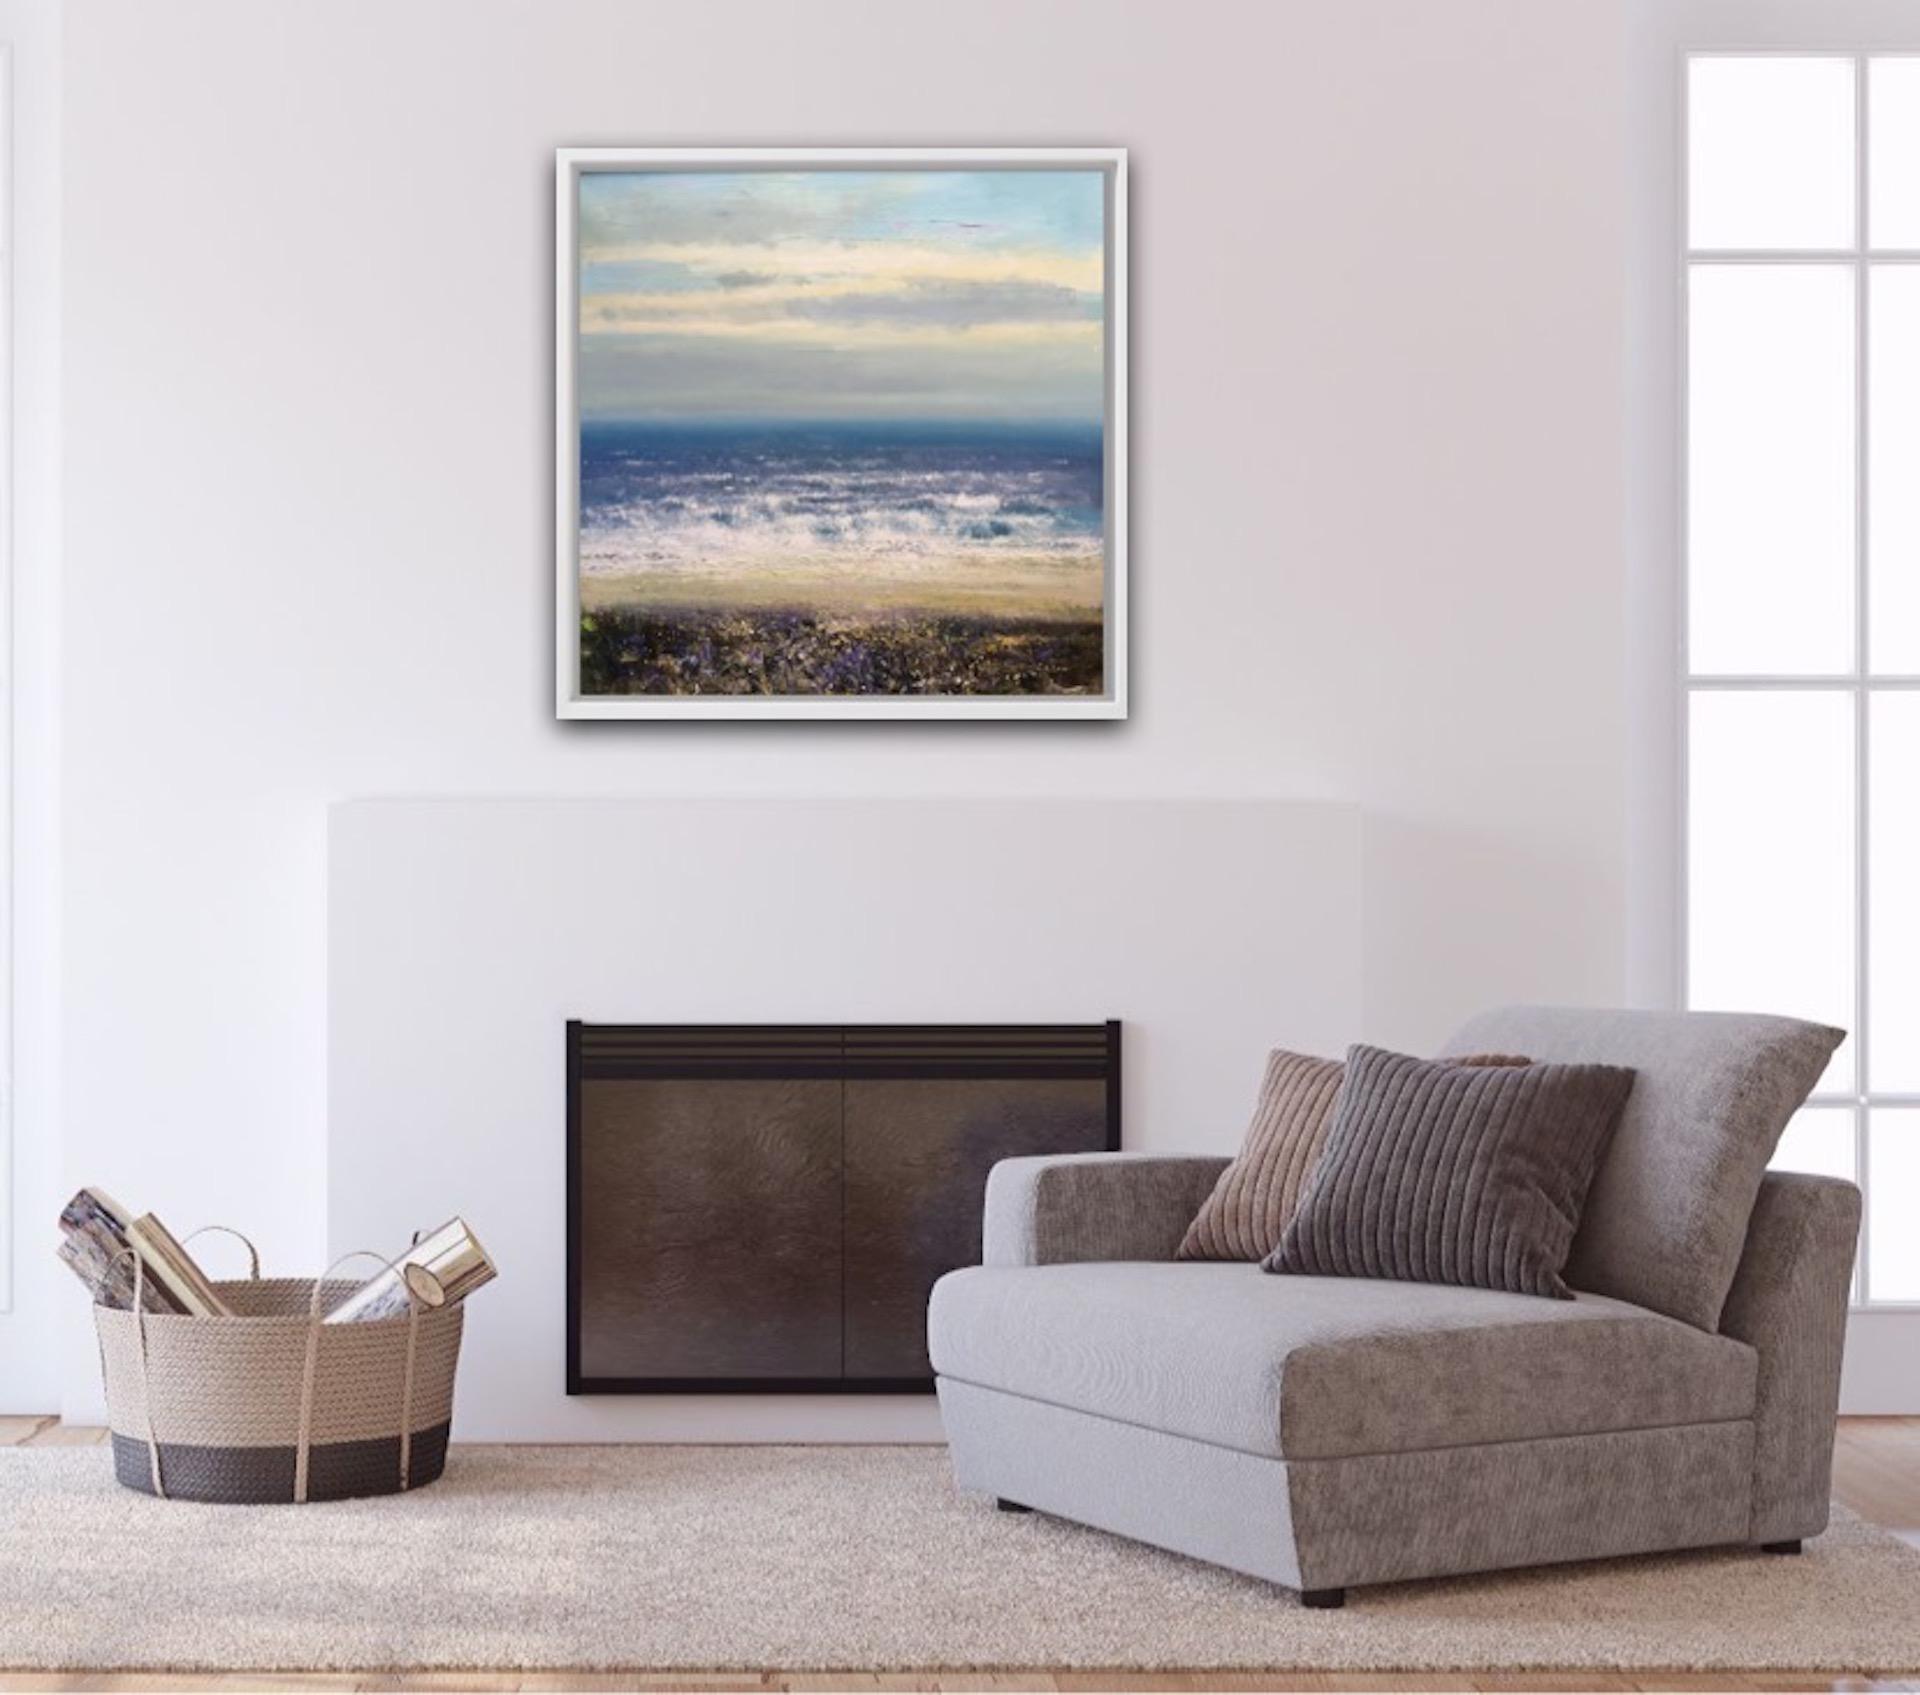 Jonathan Trim
High Tide
Original Landscape Painting
Acrylic Paint on Canvas
Canvas Size: H 80cm x W 80cm
Sold Unframed
Ready to Hang
(Please note that in situ images are purely an indication of how a piece may look.)

High Tide by Jonathan Trim is a